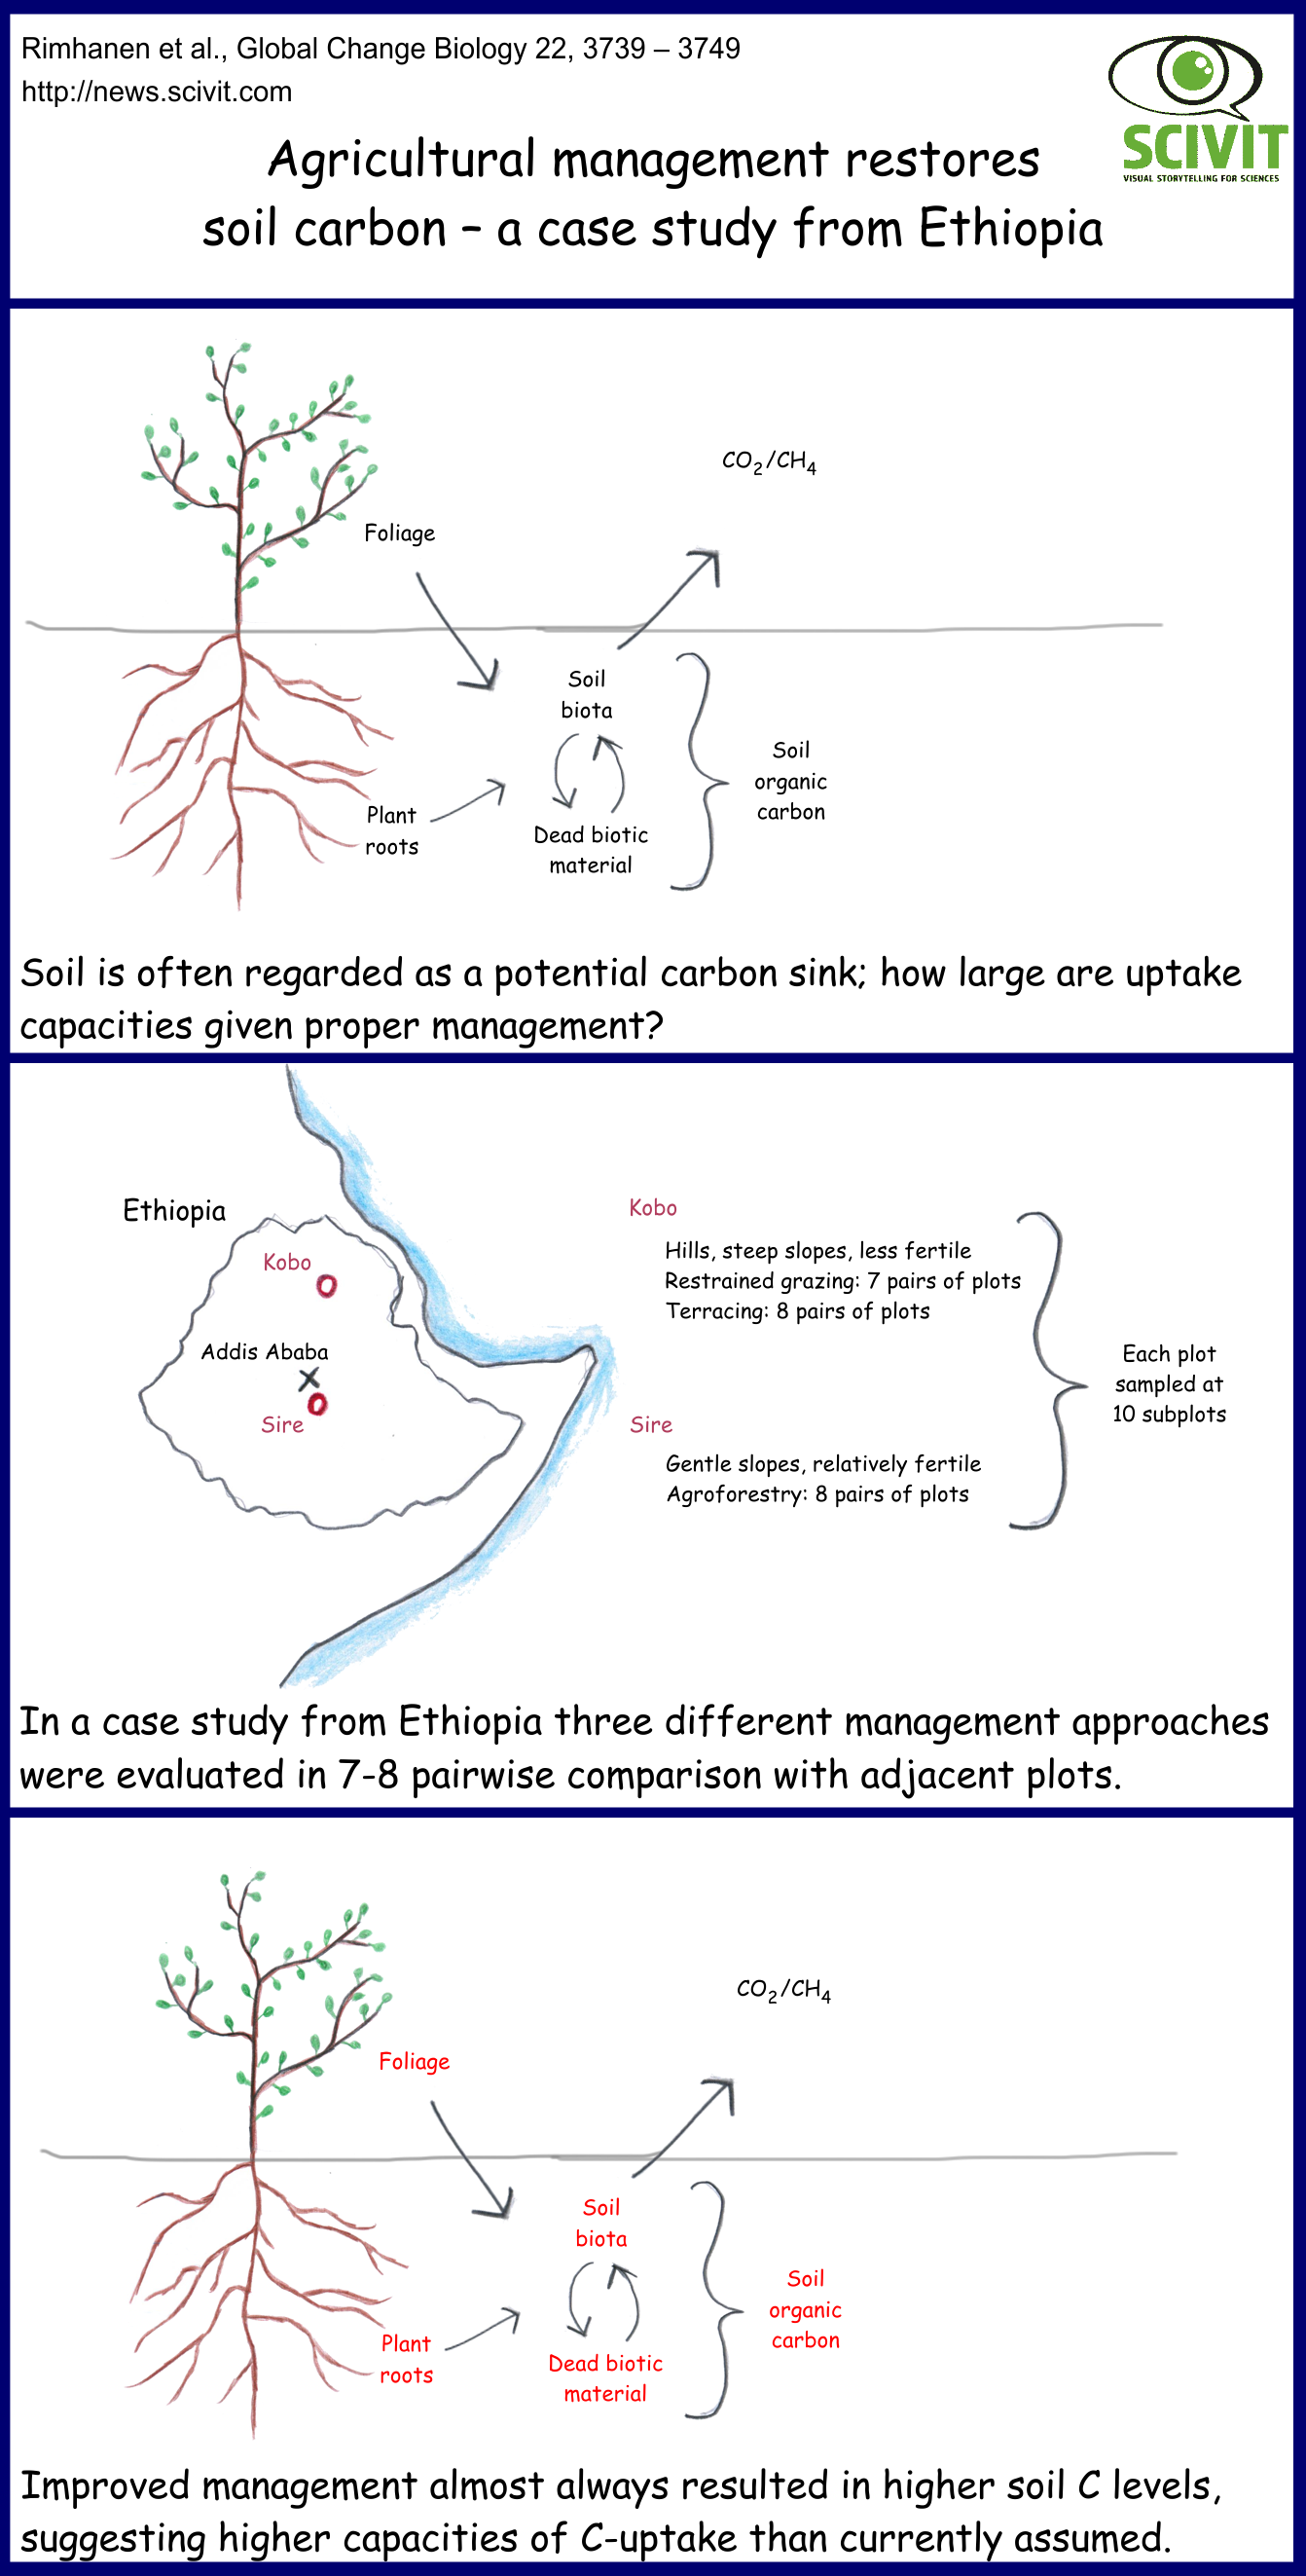 Agricultural management restores soil carbon – a case study from Ethiopia